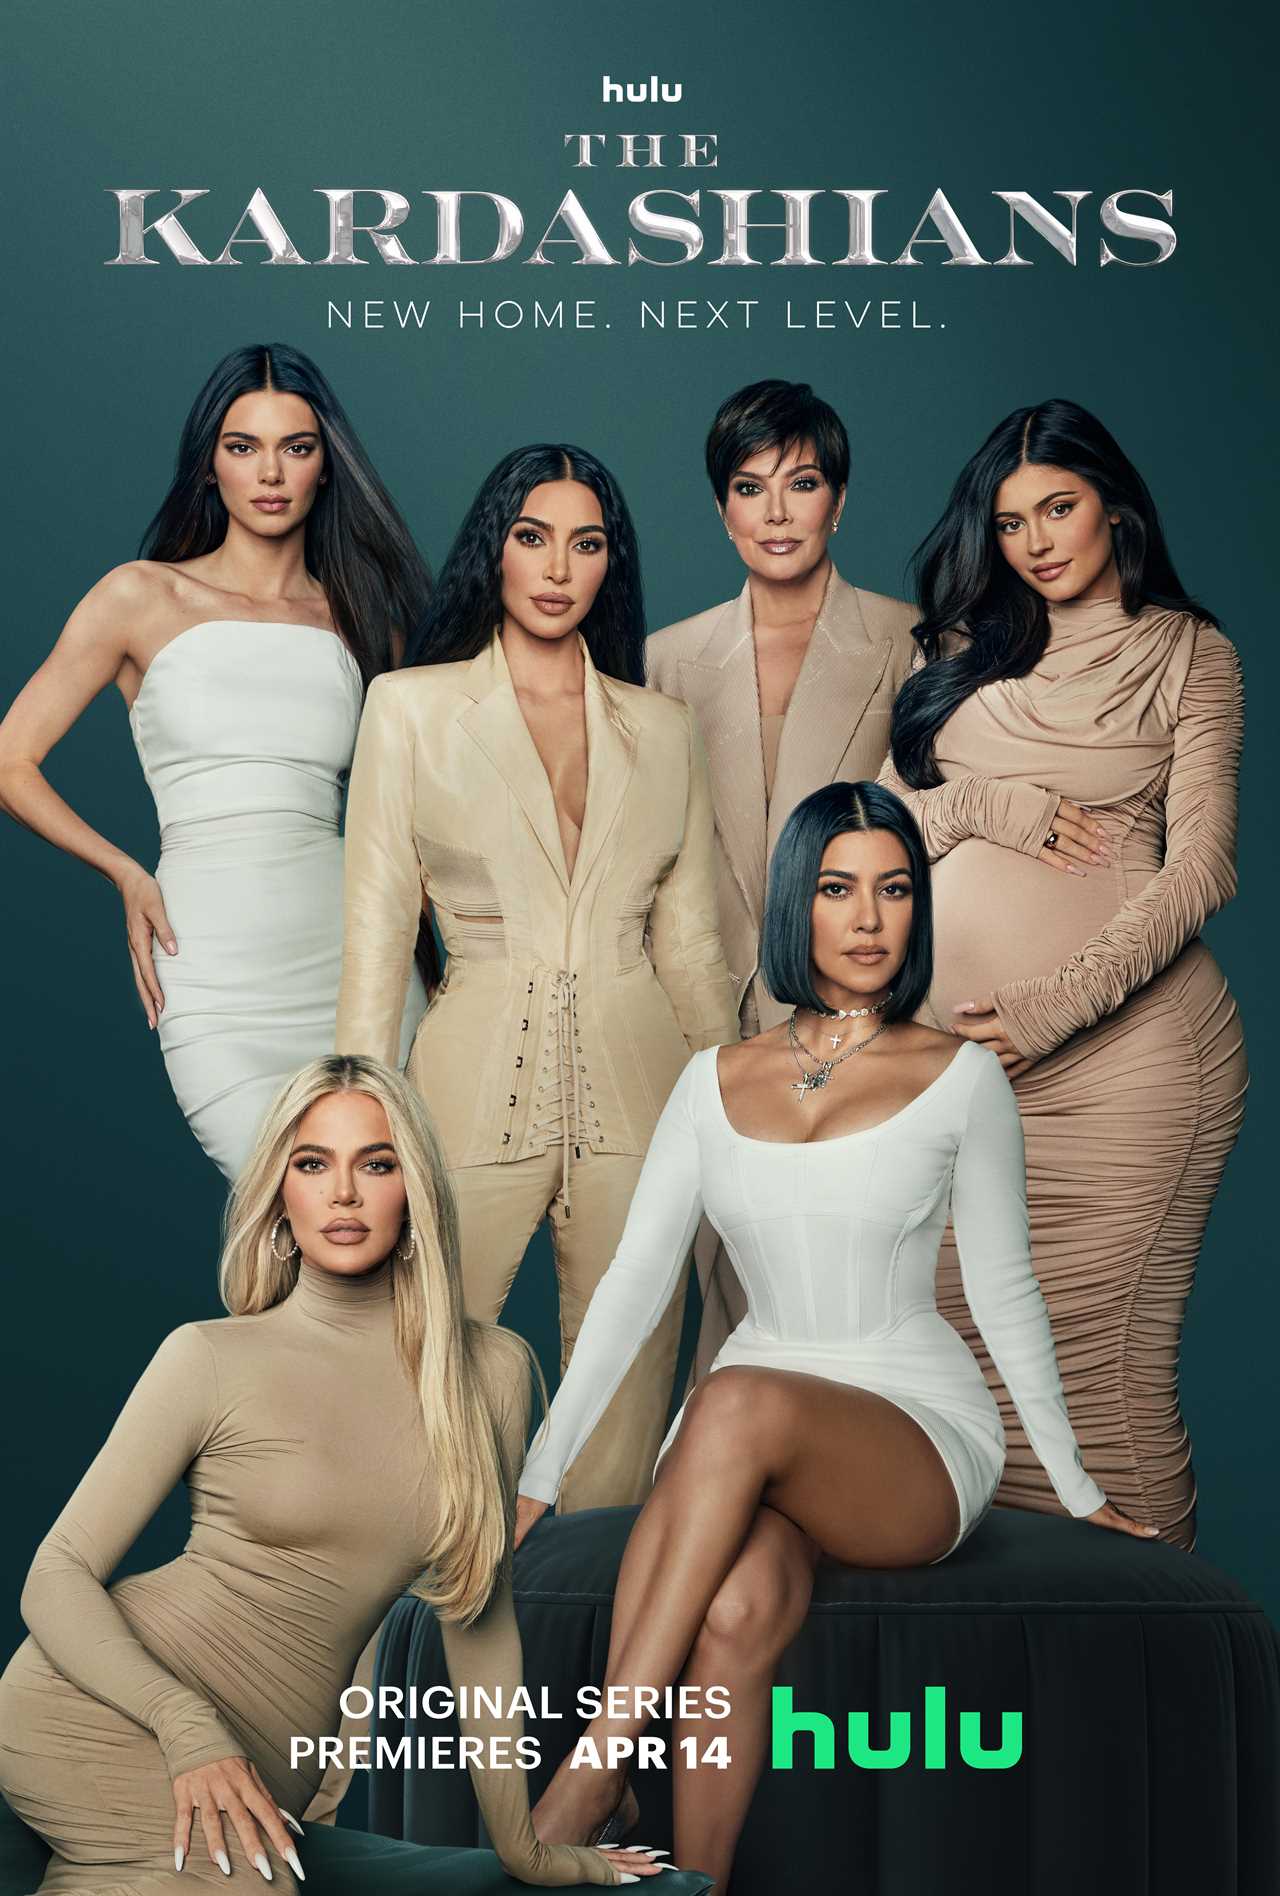 Kardashian fans think Kris Jenner ‘isn’t on speaking terms’ with one of her daughters after spotting new Instagram clue